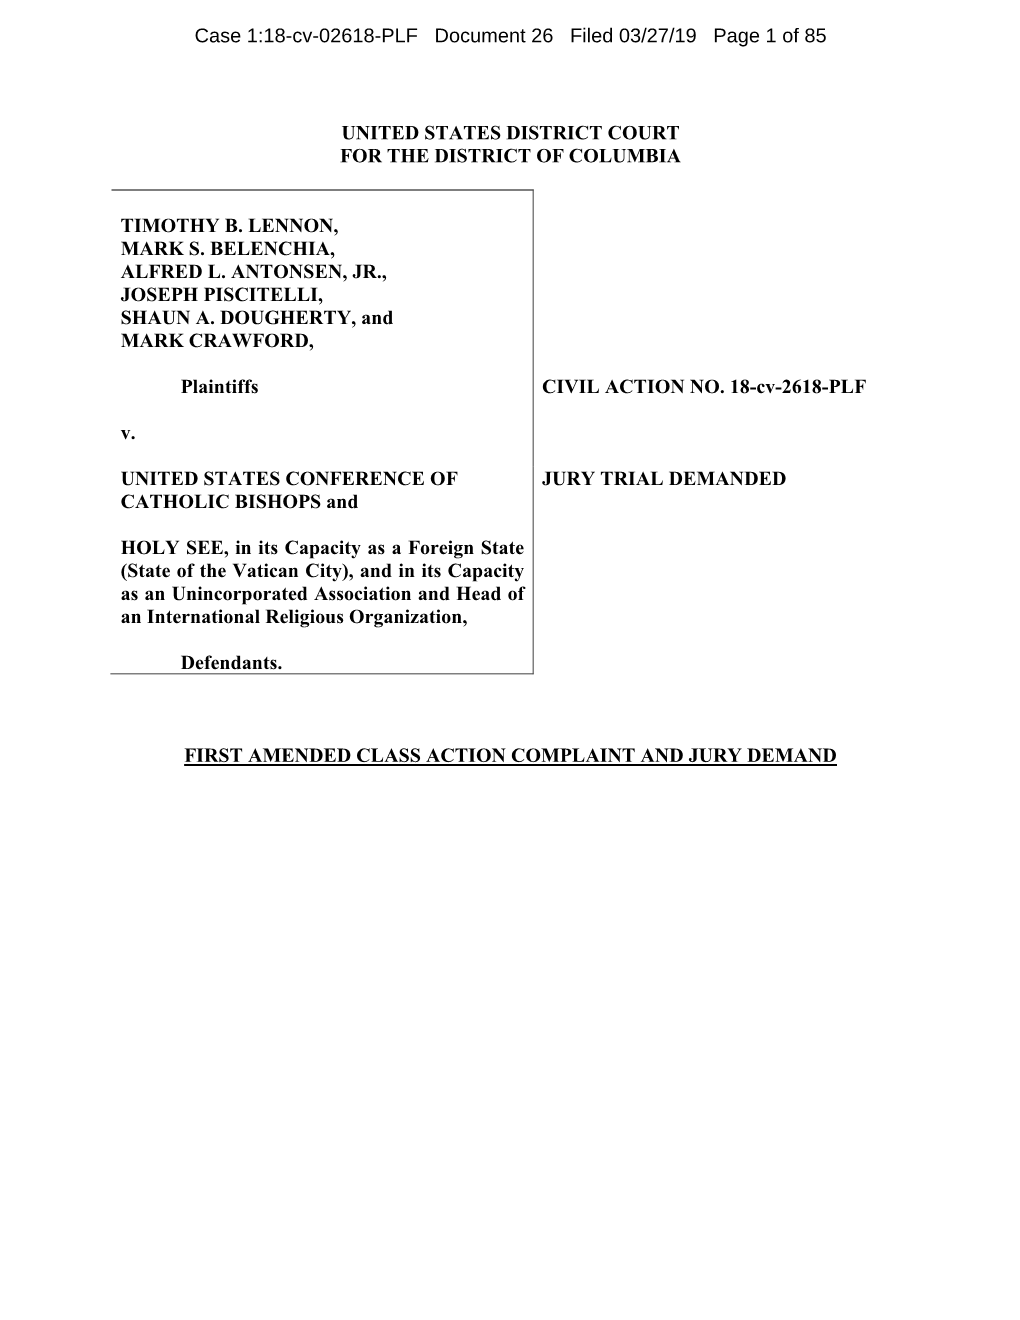 Amended Complaint